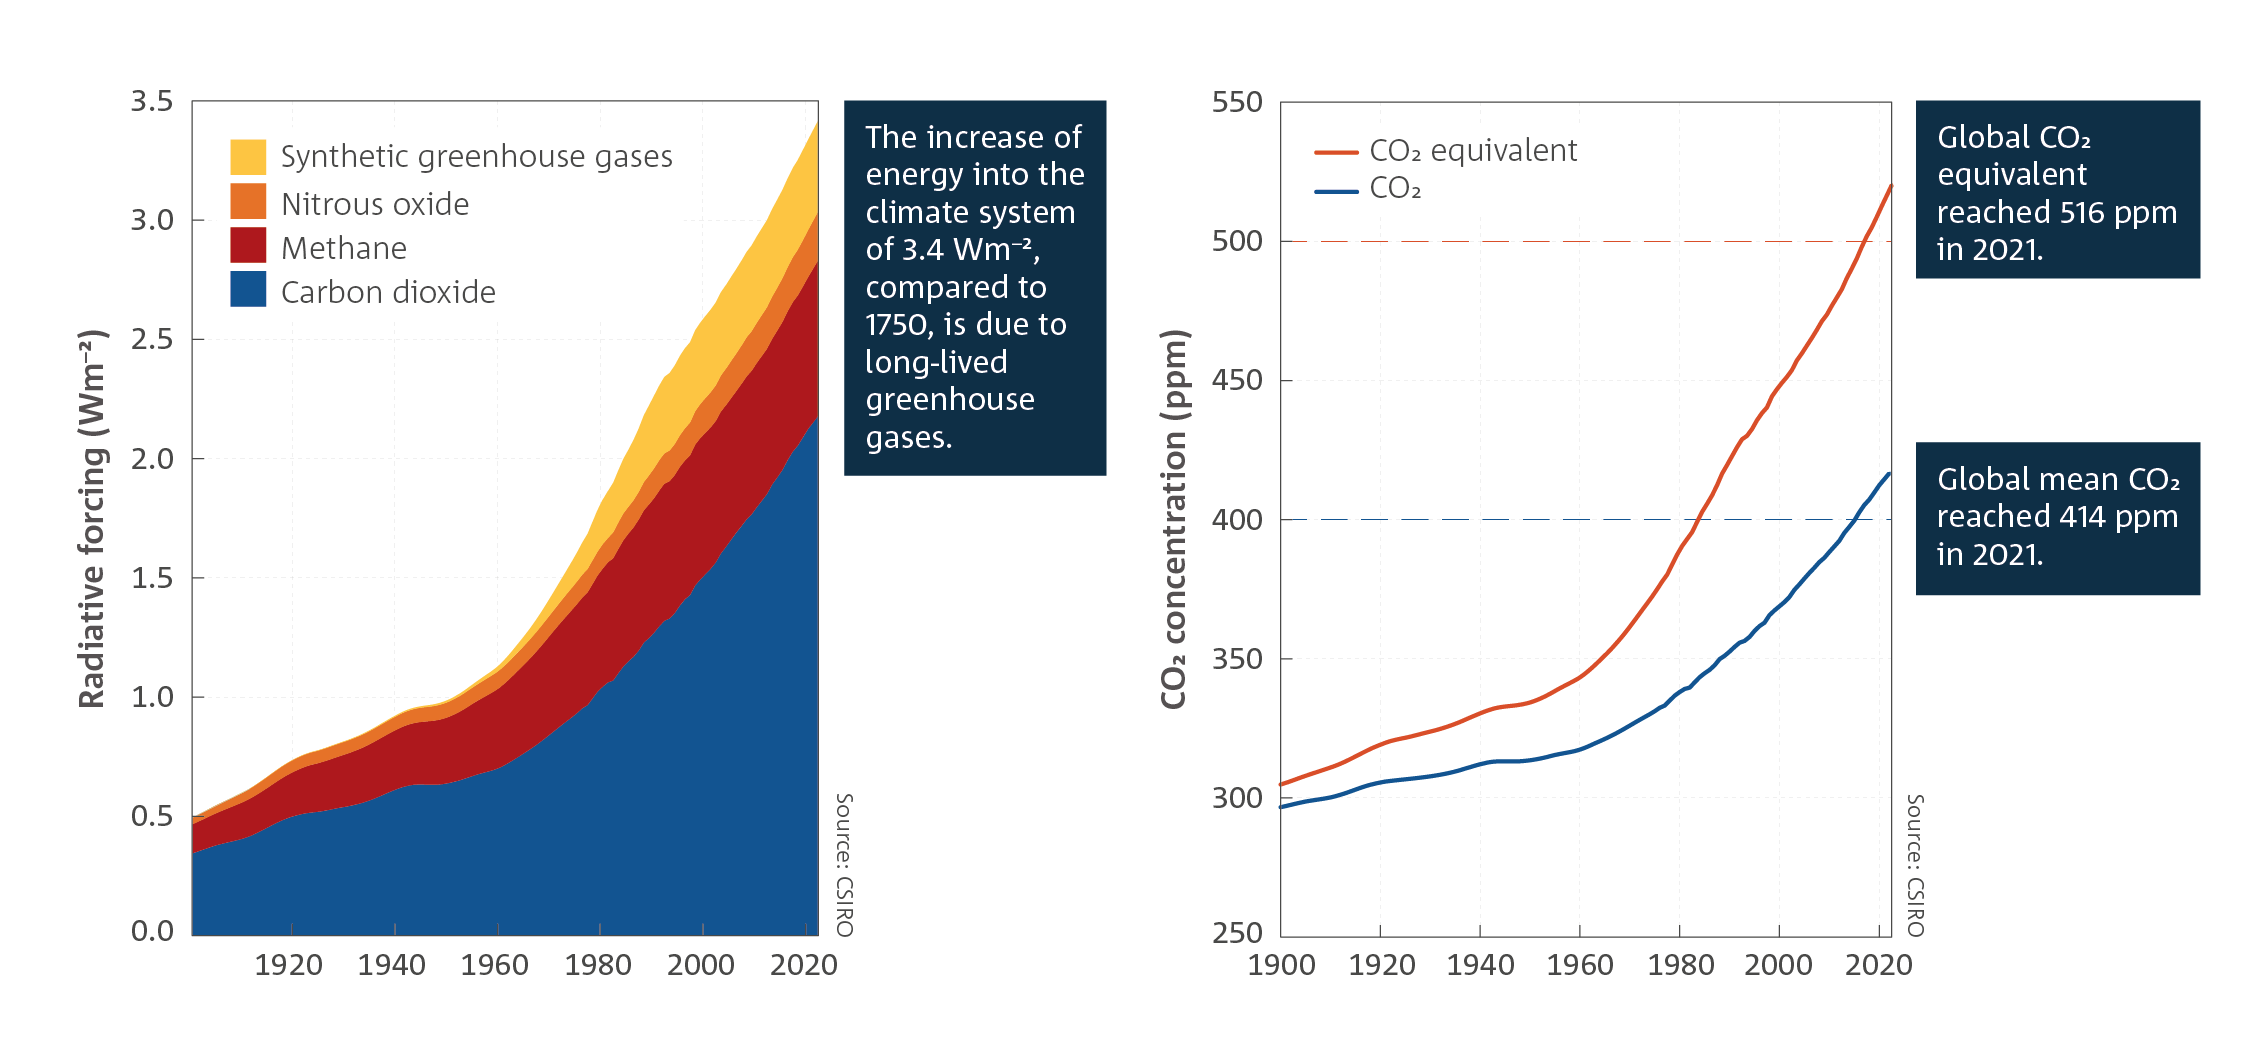 FIGURE 1: The increase of energy into the climate system of 3.4 watts per square metre, compared to 1750, is due to long-lived greenhouse gases. Stacked area chart which shows the radiative forcing of the following: synthetic greenhouse gases, nitrous oxide, methane and carbon dioxide, from 1900 to 2021. For a full description of this figure please contact: www.csiro.au/contact  FIGURE 2: Global CO2 equivalent reached 516 ppm in 2021. Global mean CO2 reached 414 ppm in 2021. Line chart which shows two lines (CO2 and CO2 equivalent) with rising carbon dioxide concentration (ppm) between 1900 to 2021. For a full description of this figure please contact: www.csiro.au/contact